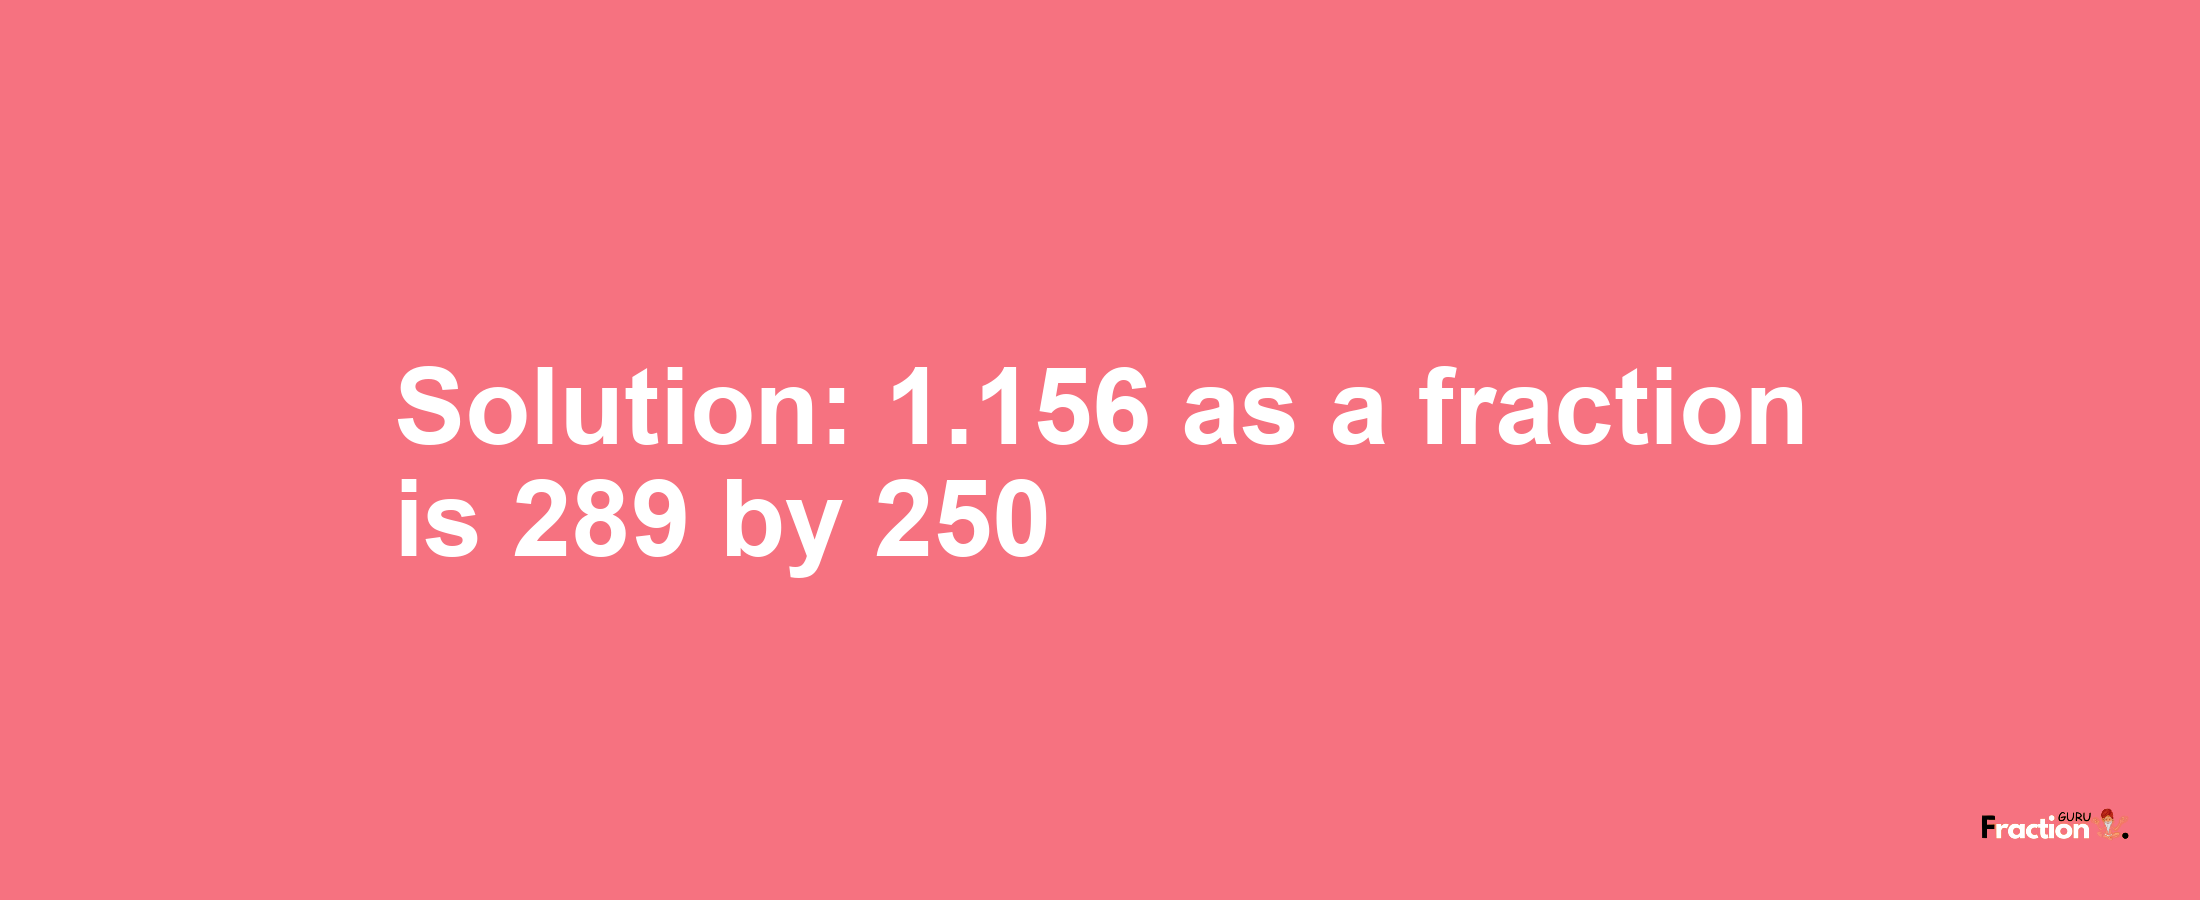 Solution:1.156 as a fraction is 289/250